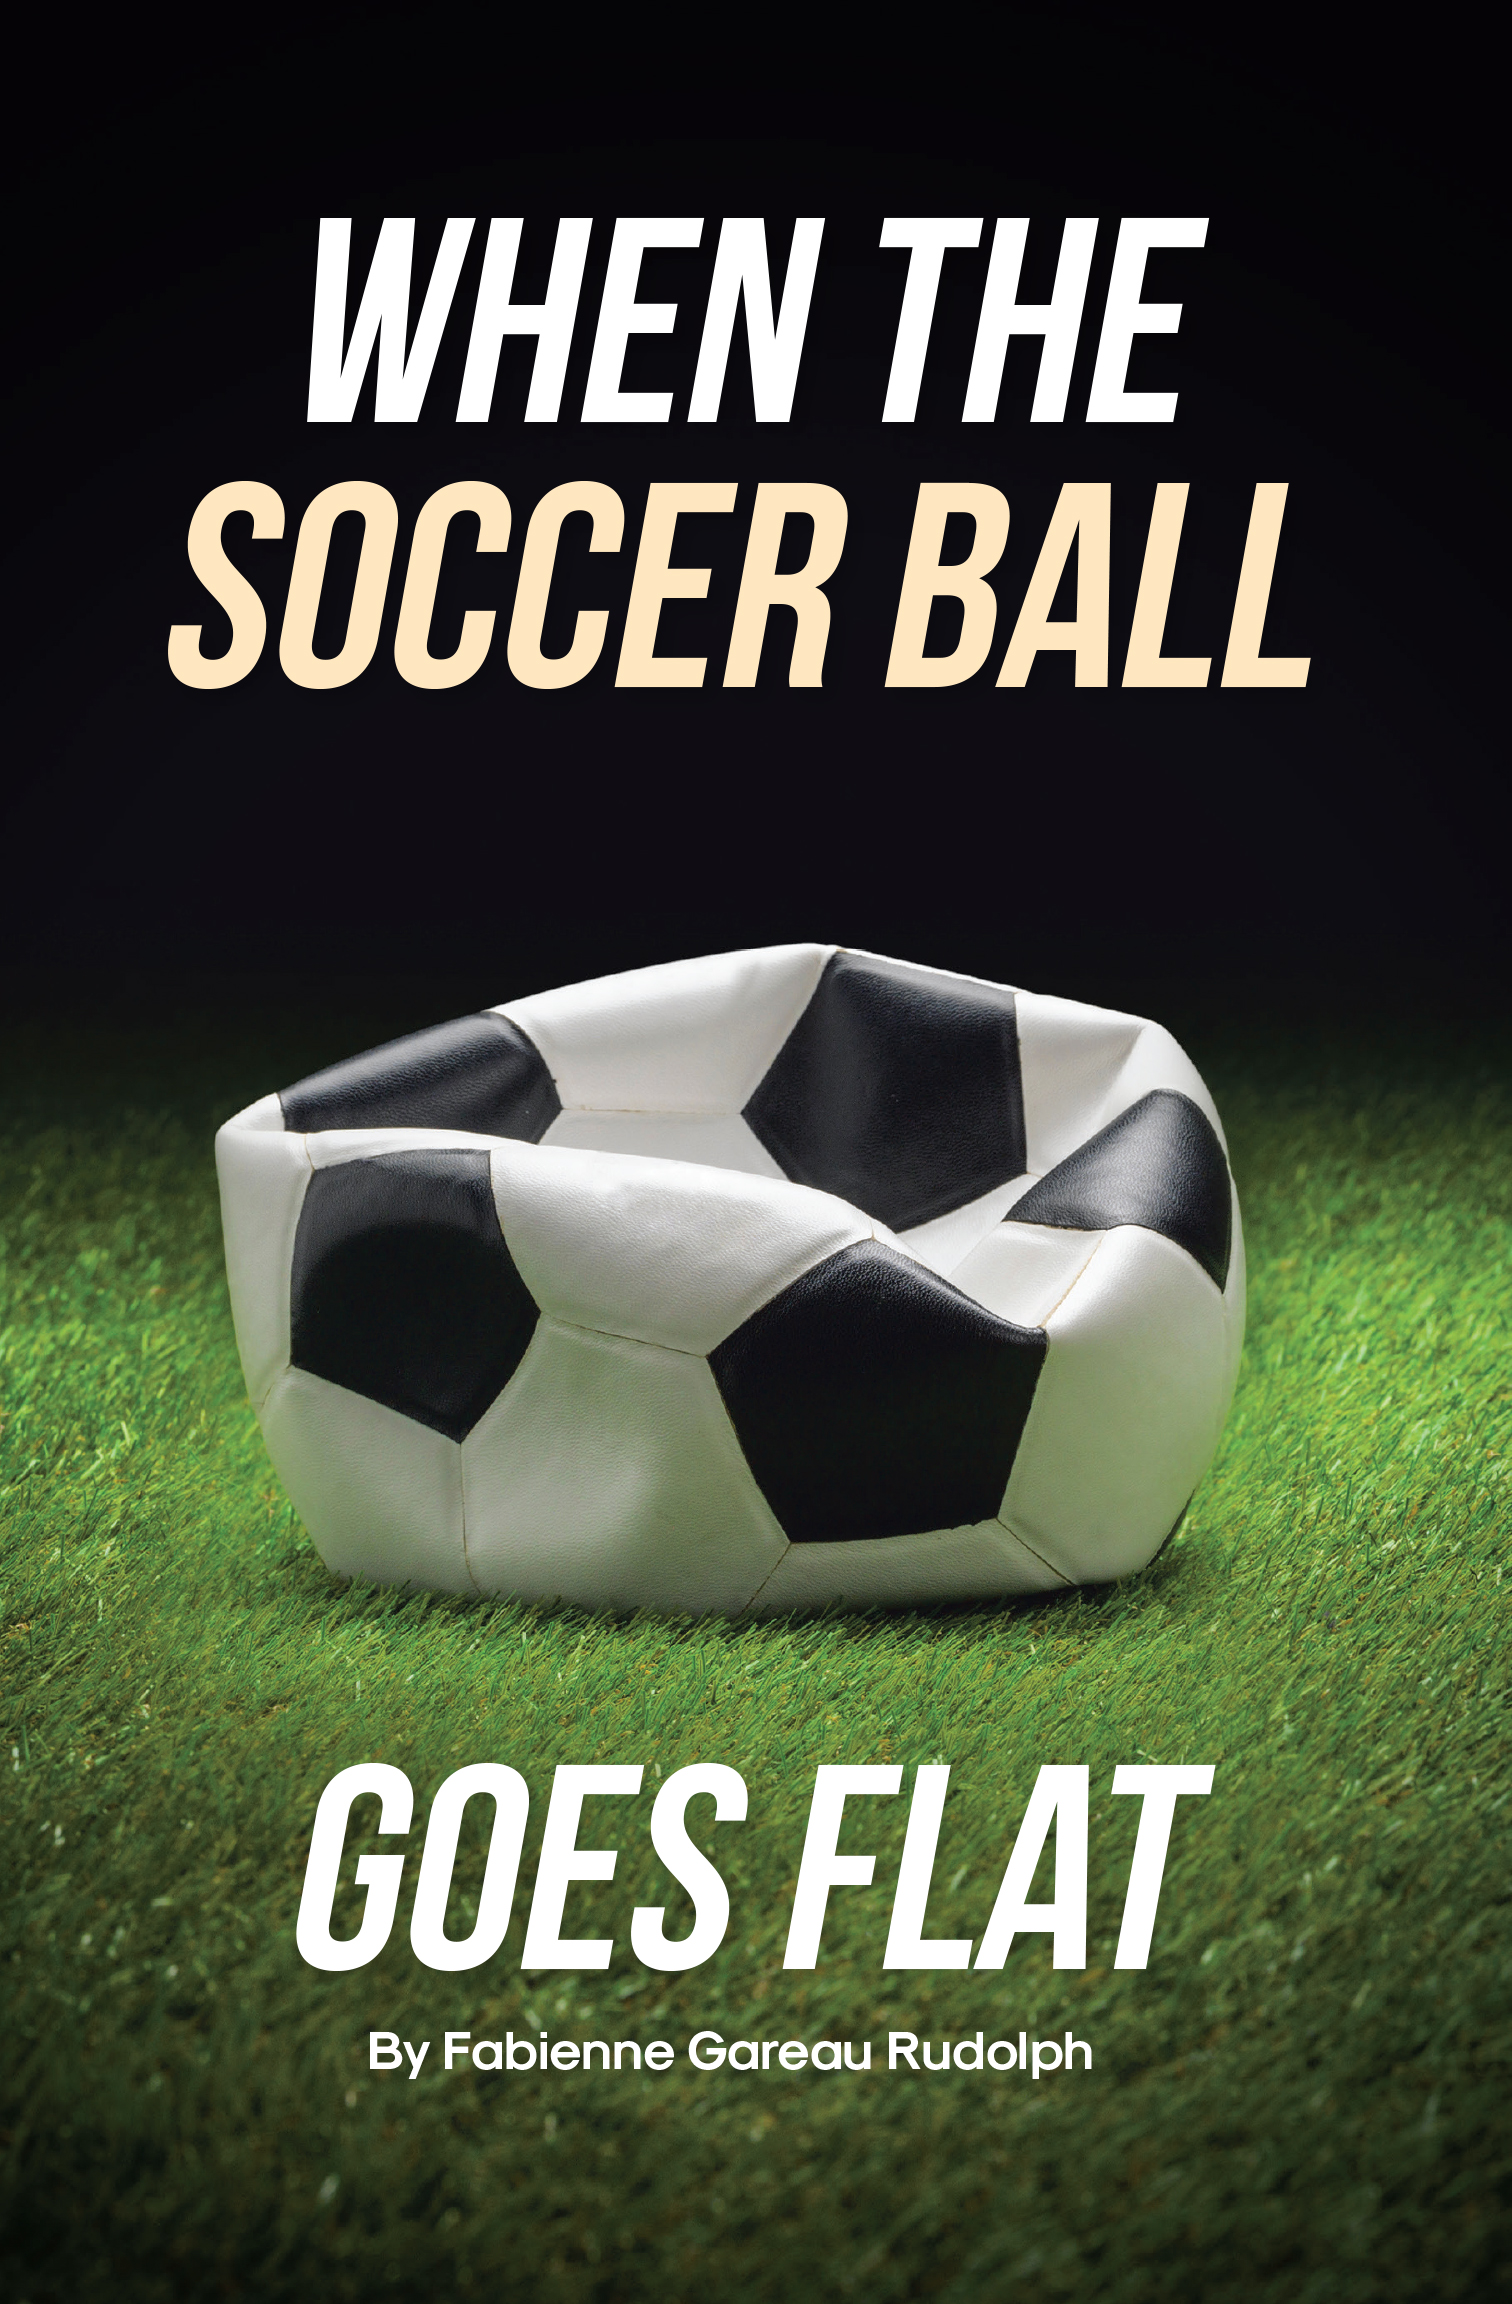 Author Fabienne Gareau Rudolph’s New Book, "When the Soccer Ball Goes Flat," is a Powerful Journey of Faith and Perseverance Following a Diagnosis of Multiple Sclerosis